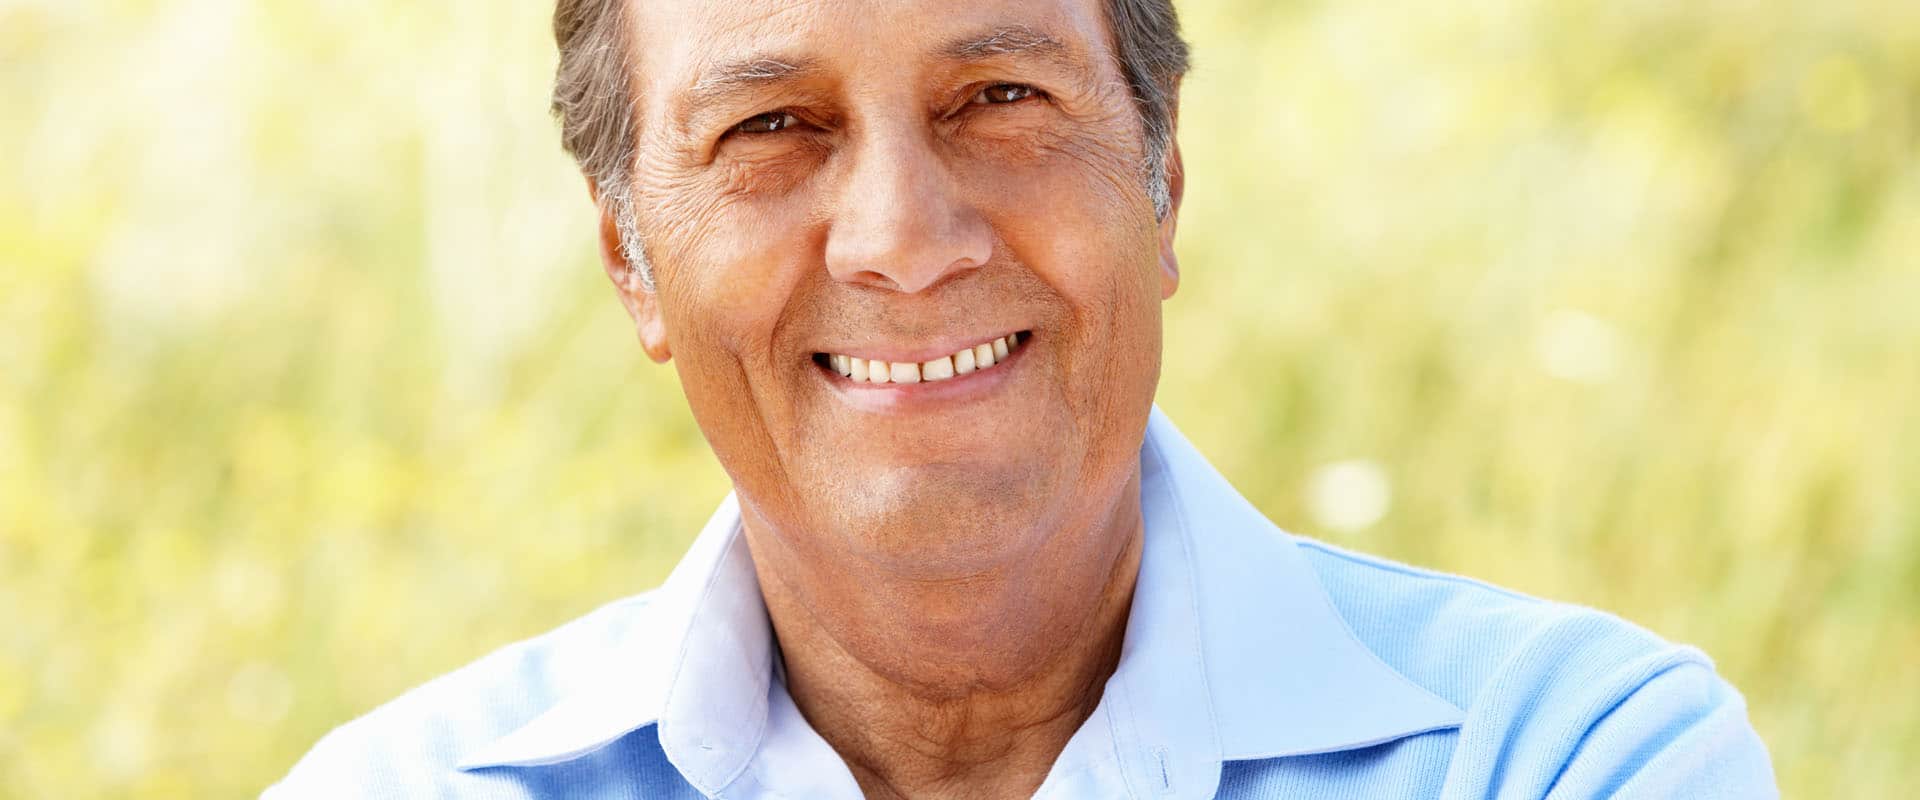 Single Tooth Dental Implants for a Healthy Mouth